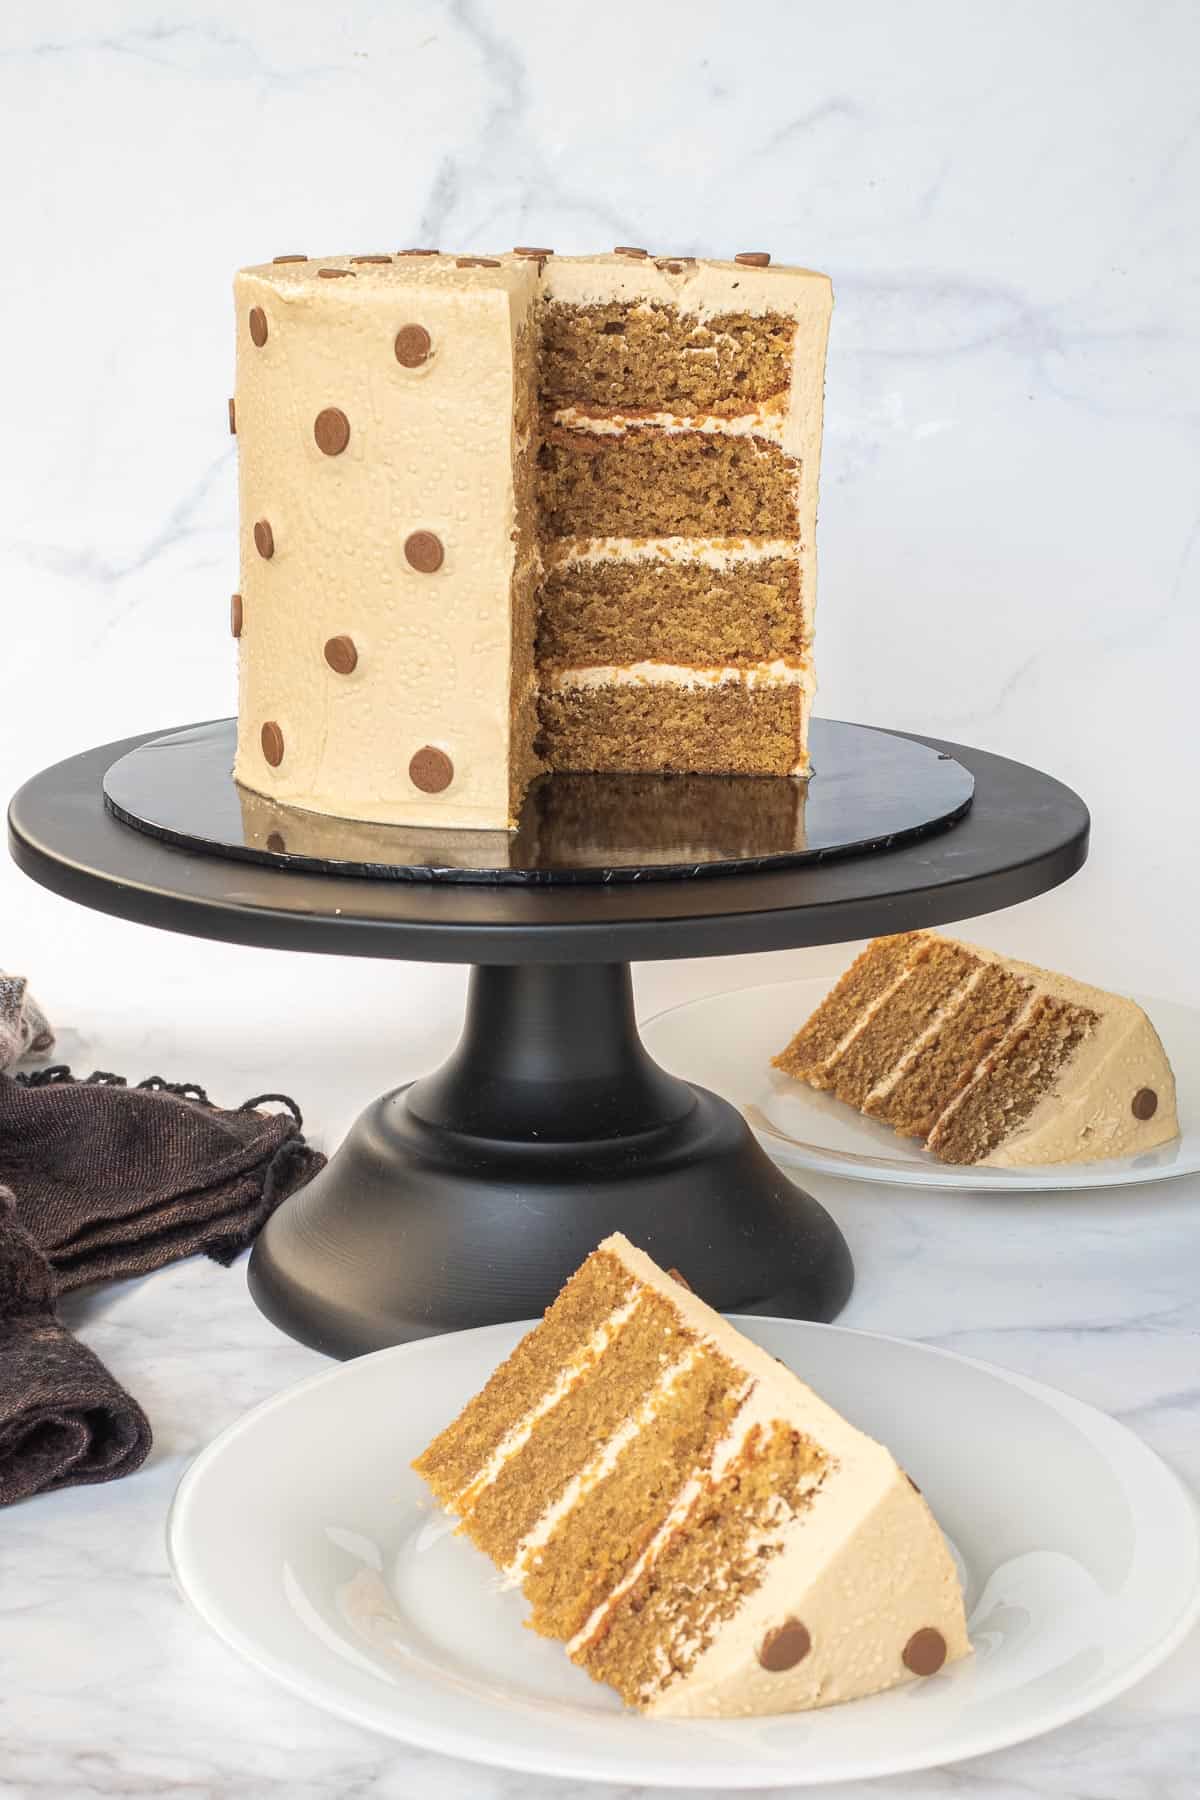 A round coffee flavored cake decorated with polka dots icing. Cake is in a black cake stand with a slice cut onto a white plate.